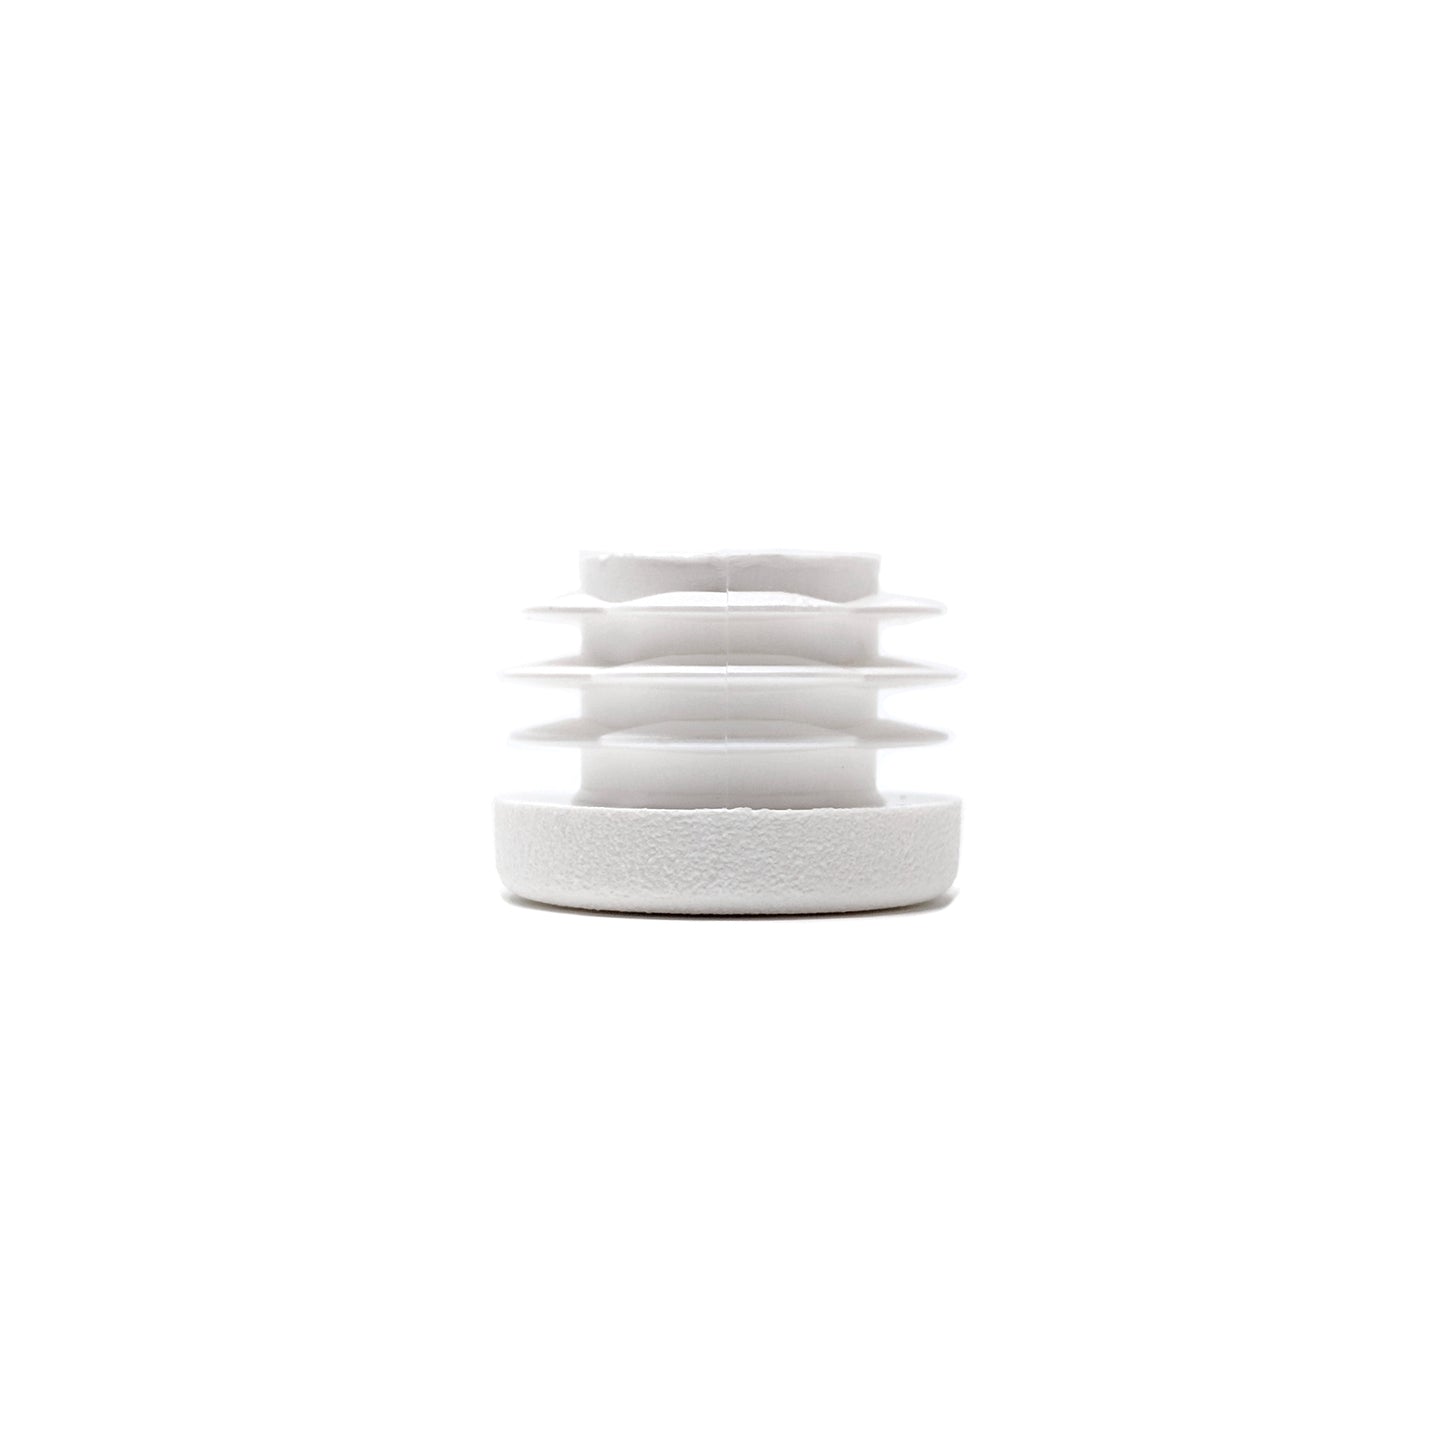 Round Tube Inserts 23mm White | Made in Germany | Keay Vital Parts - Keay Vital Parts